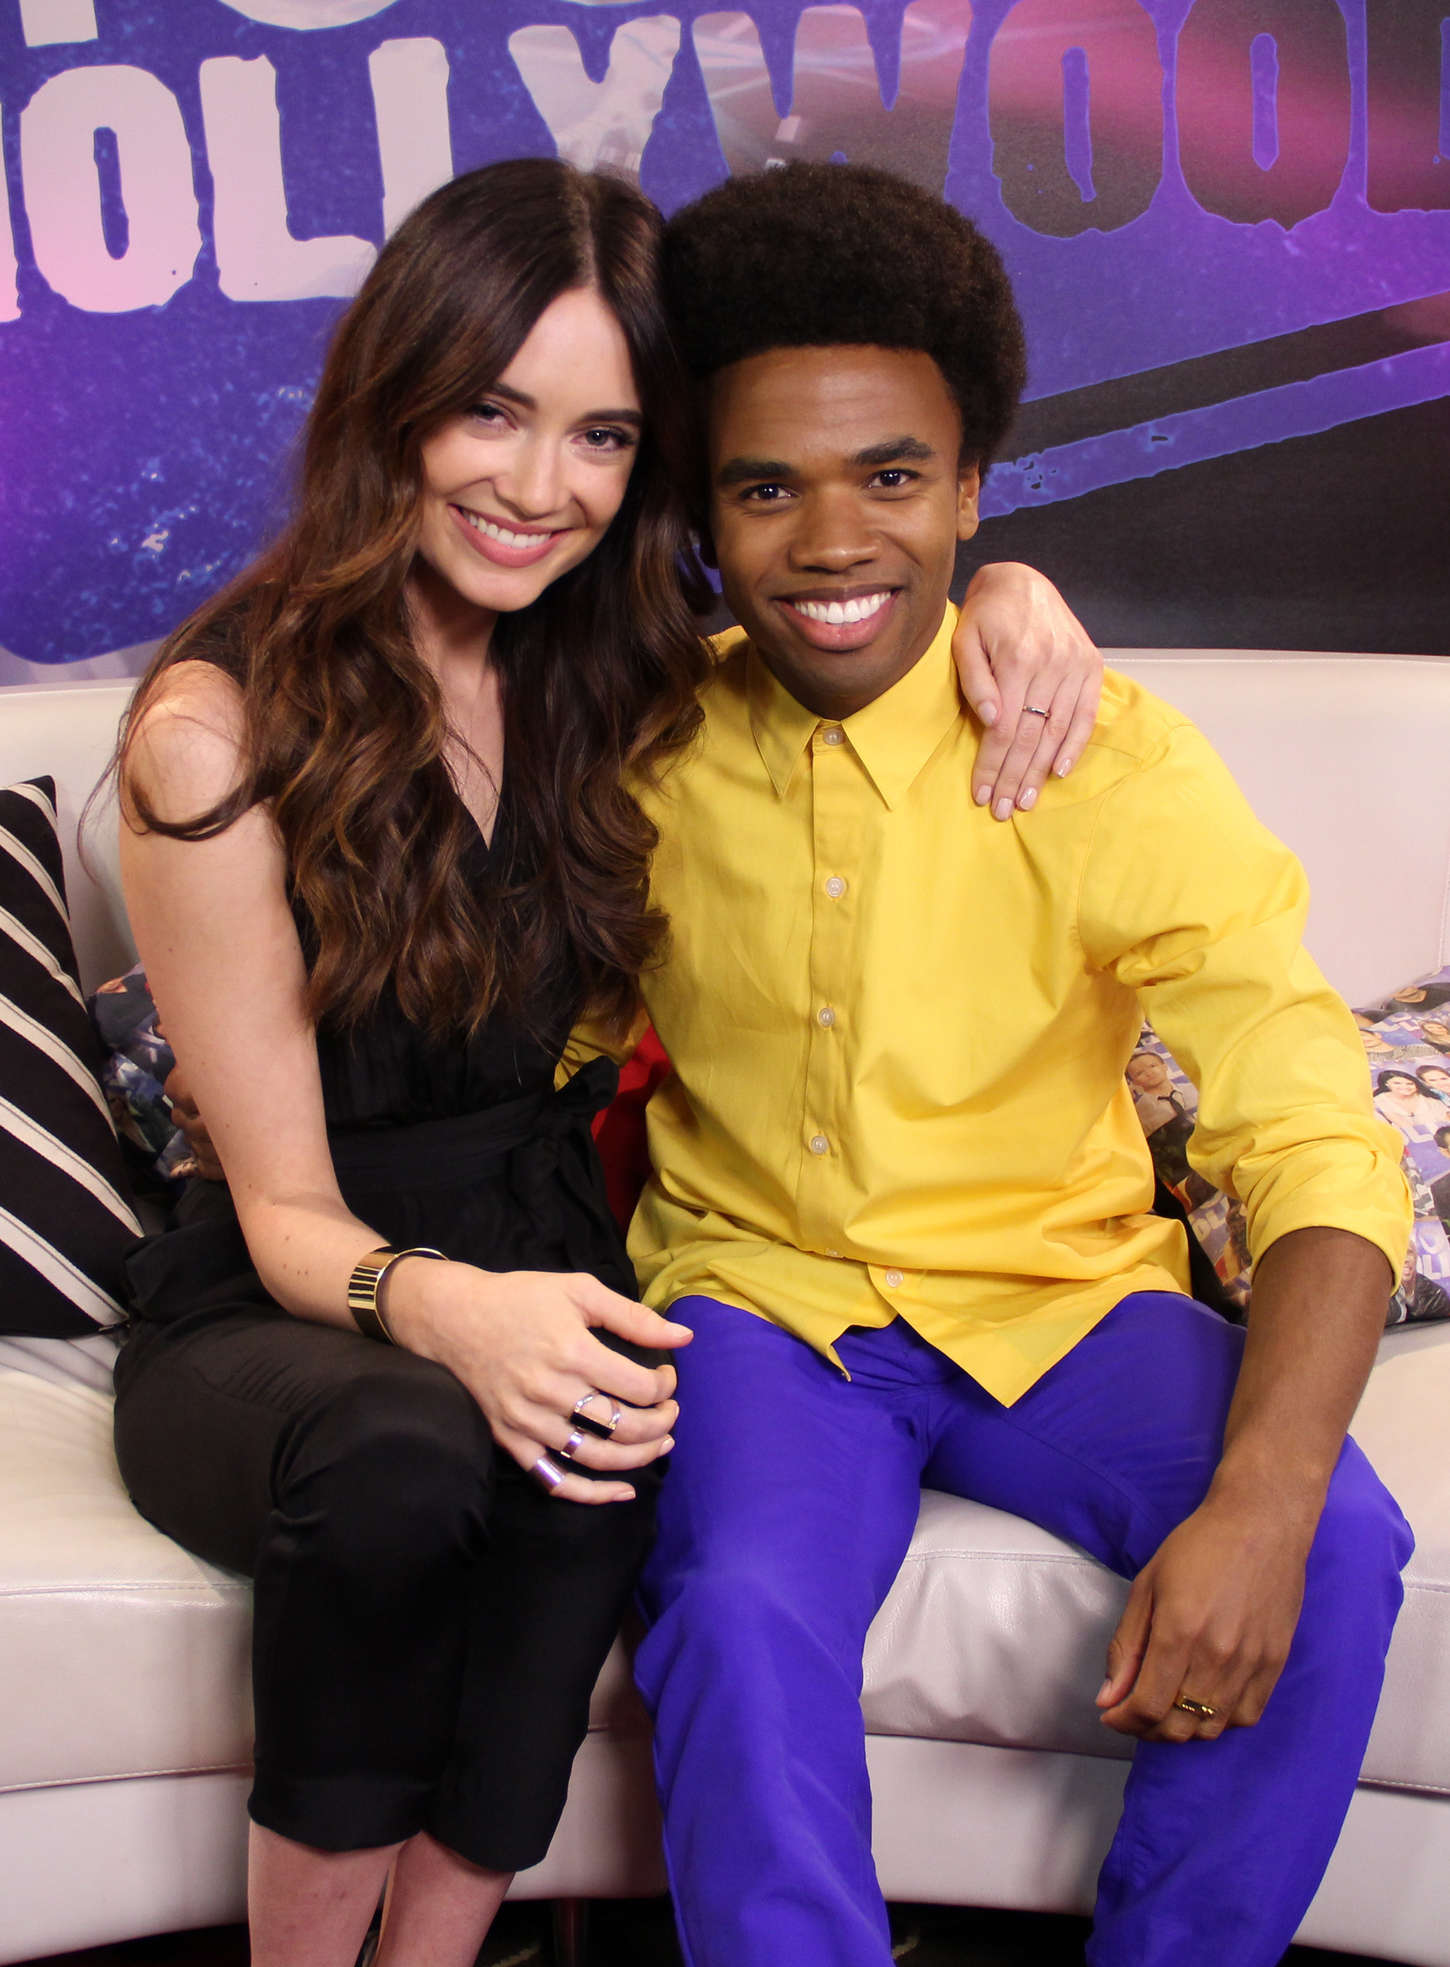 Mallory Jansen Visiting the Young Hollywood Studio in Los Angeles